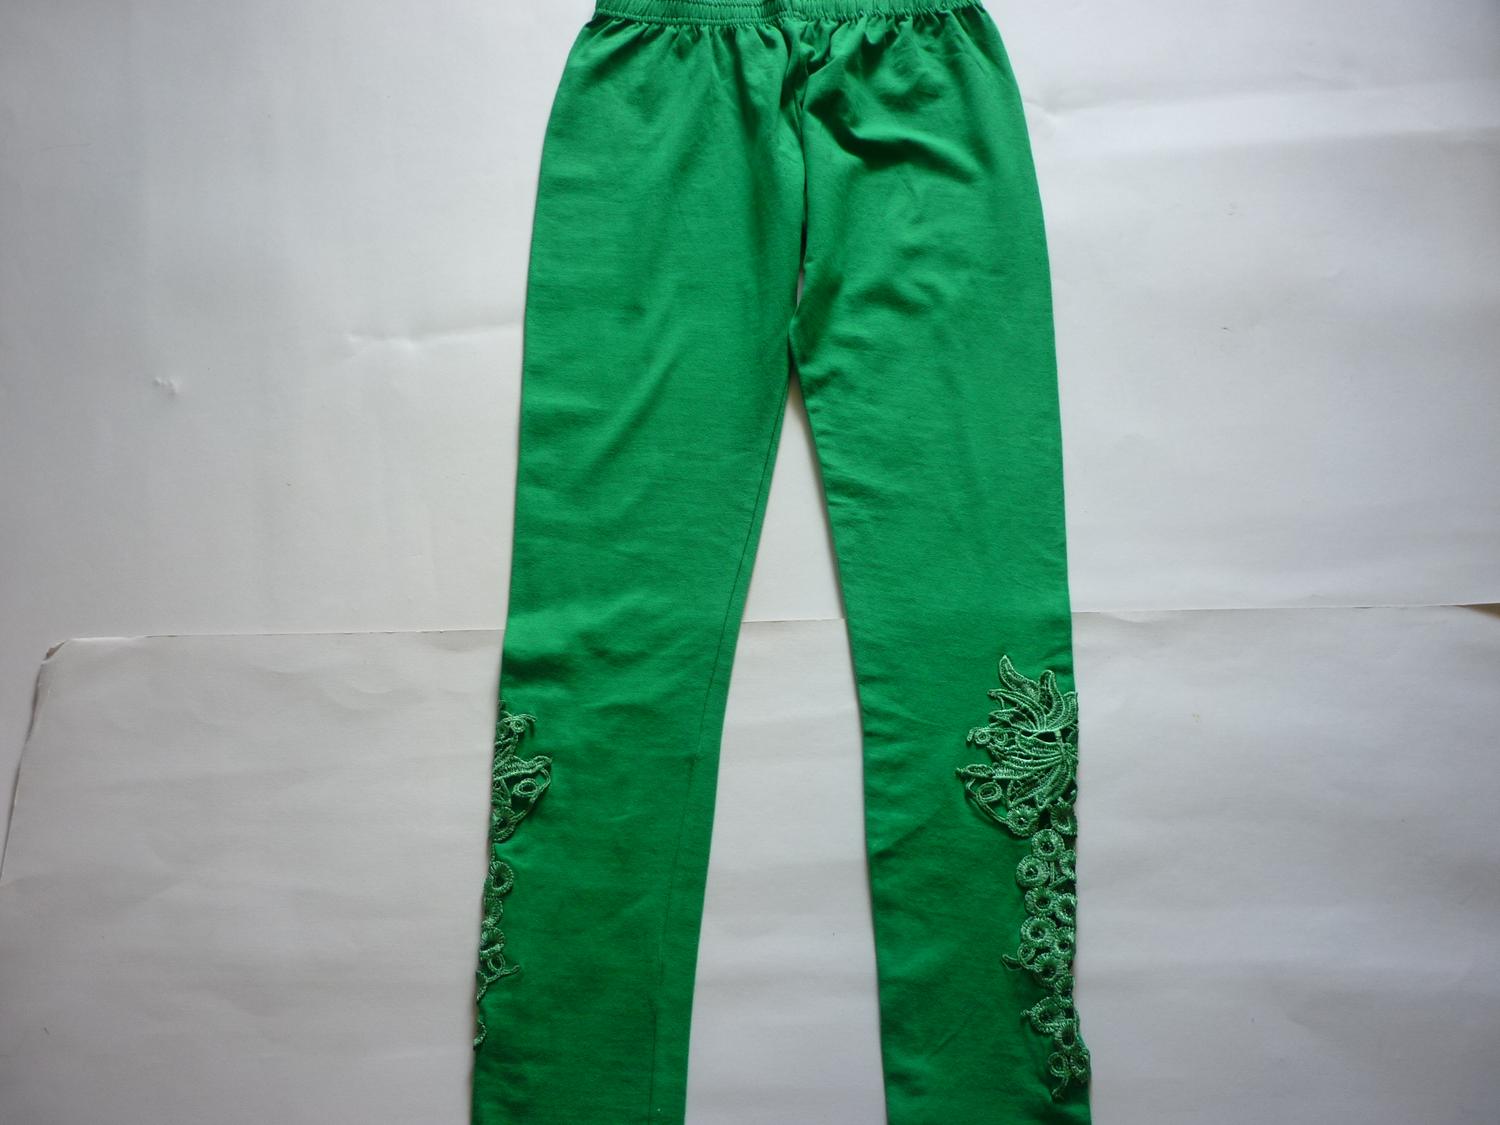 LEGGING FOR GIRLS-GREEN COLOR -LARGE-FREIGHT FREE-LOWEST PRICE GUARANTEED-TRY ATLEAST  ONCE- DO NOT MISS THIS CHANCE-50% DISCOUNT-ART.NO.10/34755708